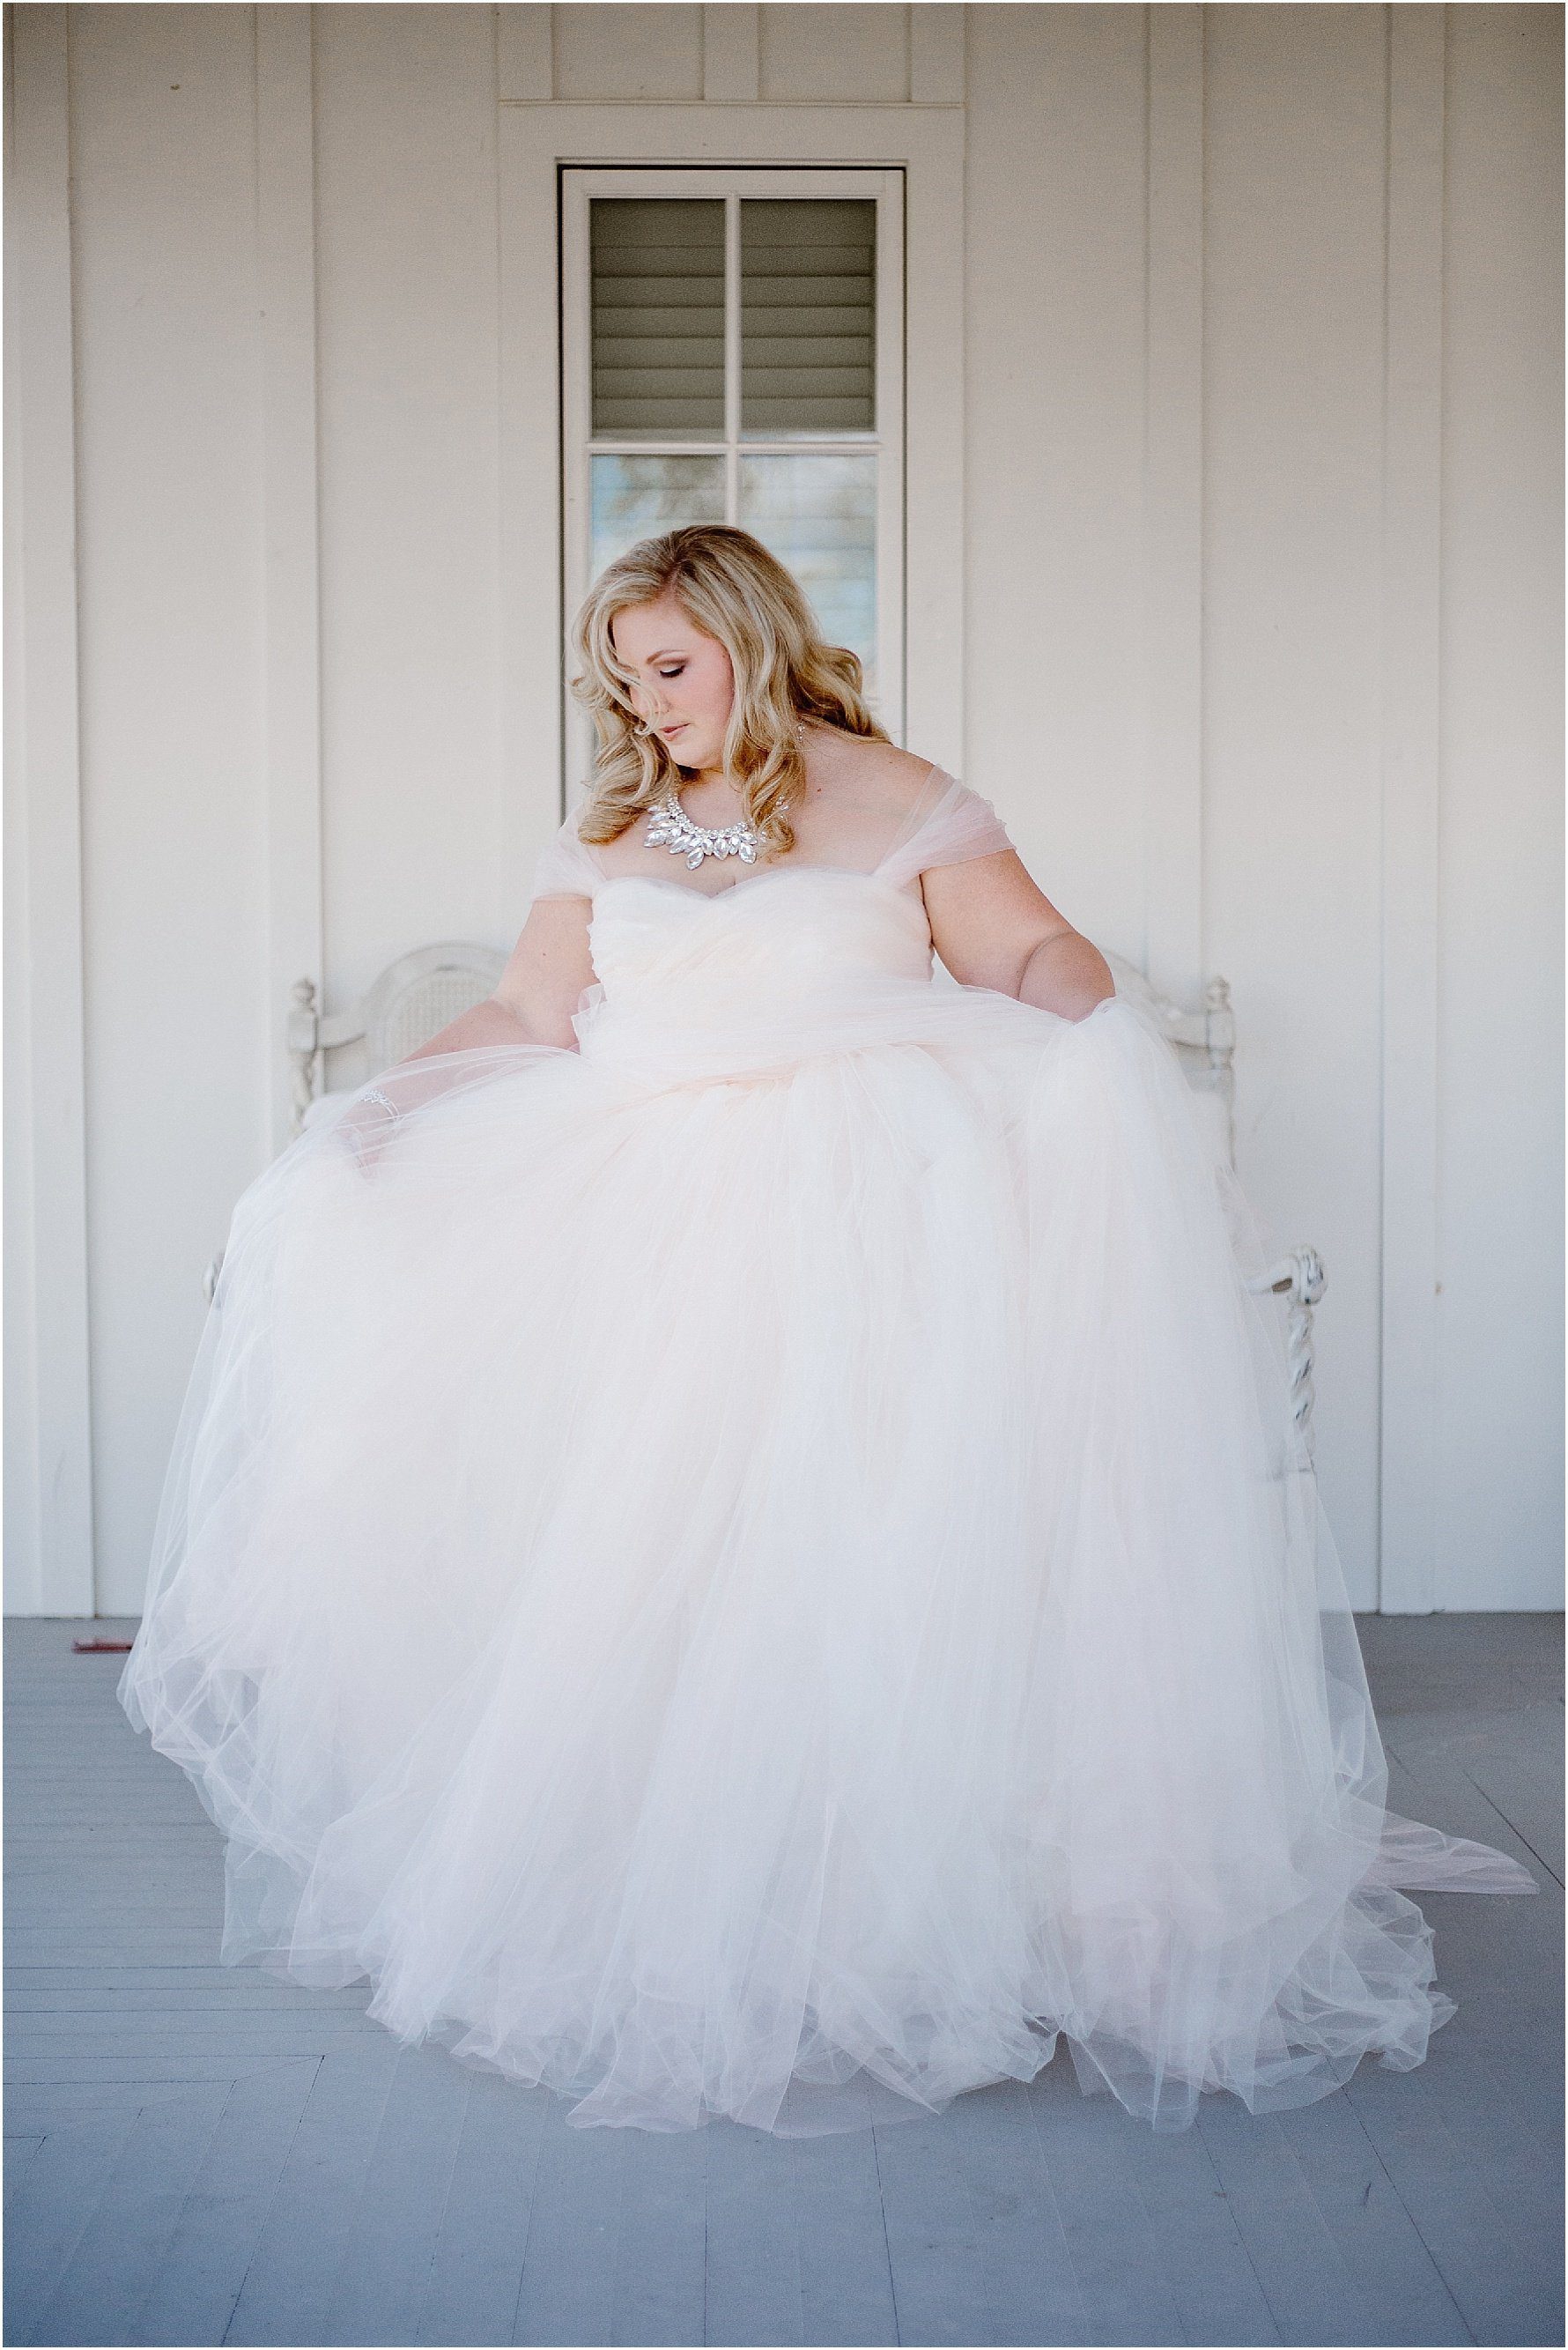 Custom Gowns in Knoxville | Erin Morrison Photography www.erinmorrisonphotography.com